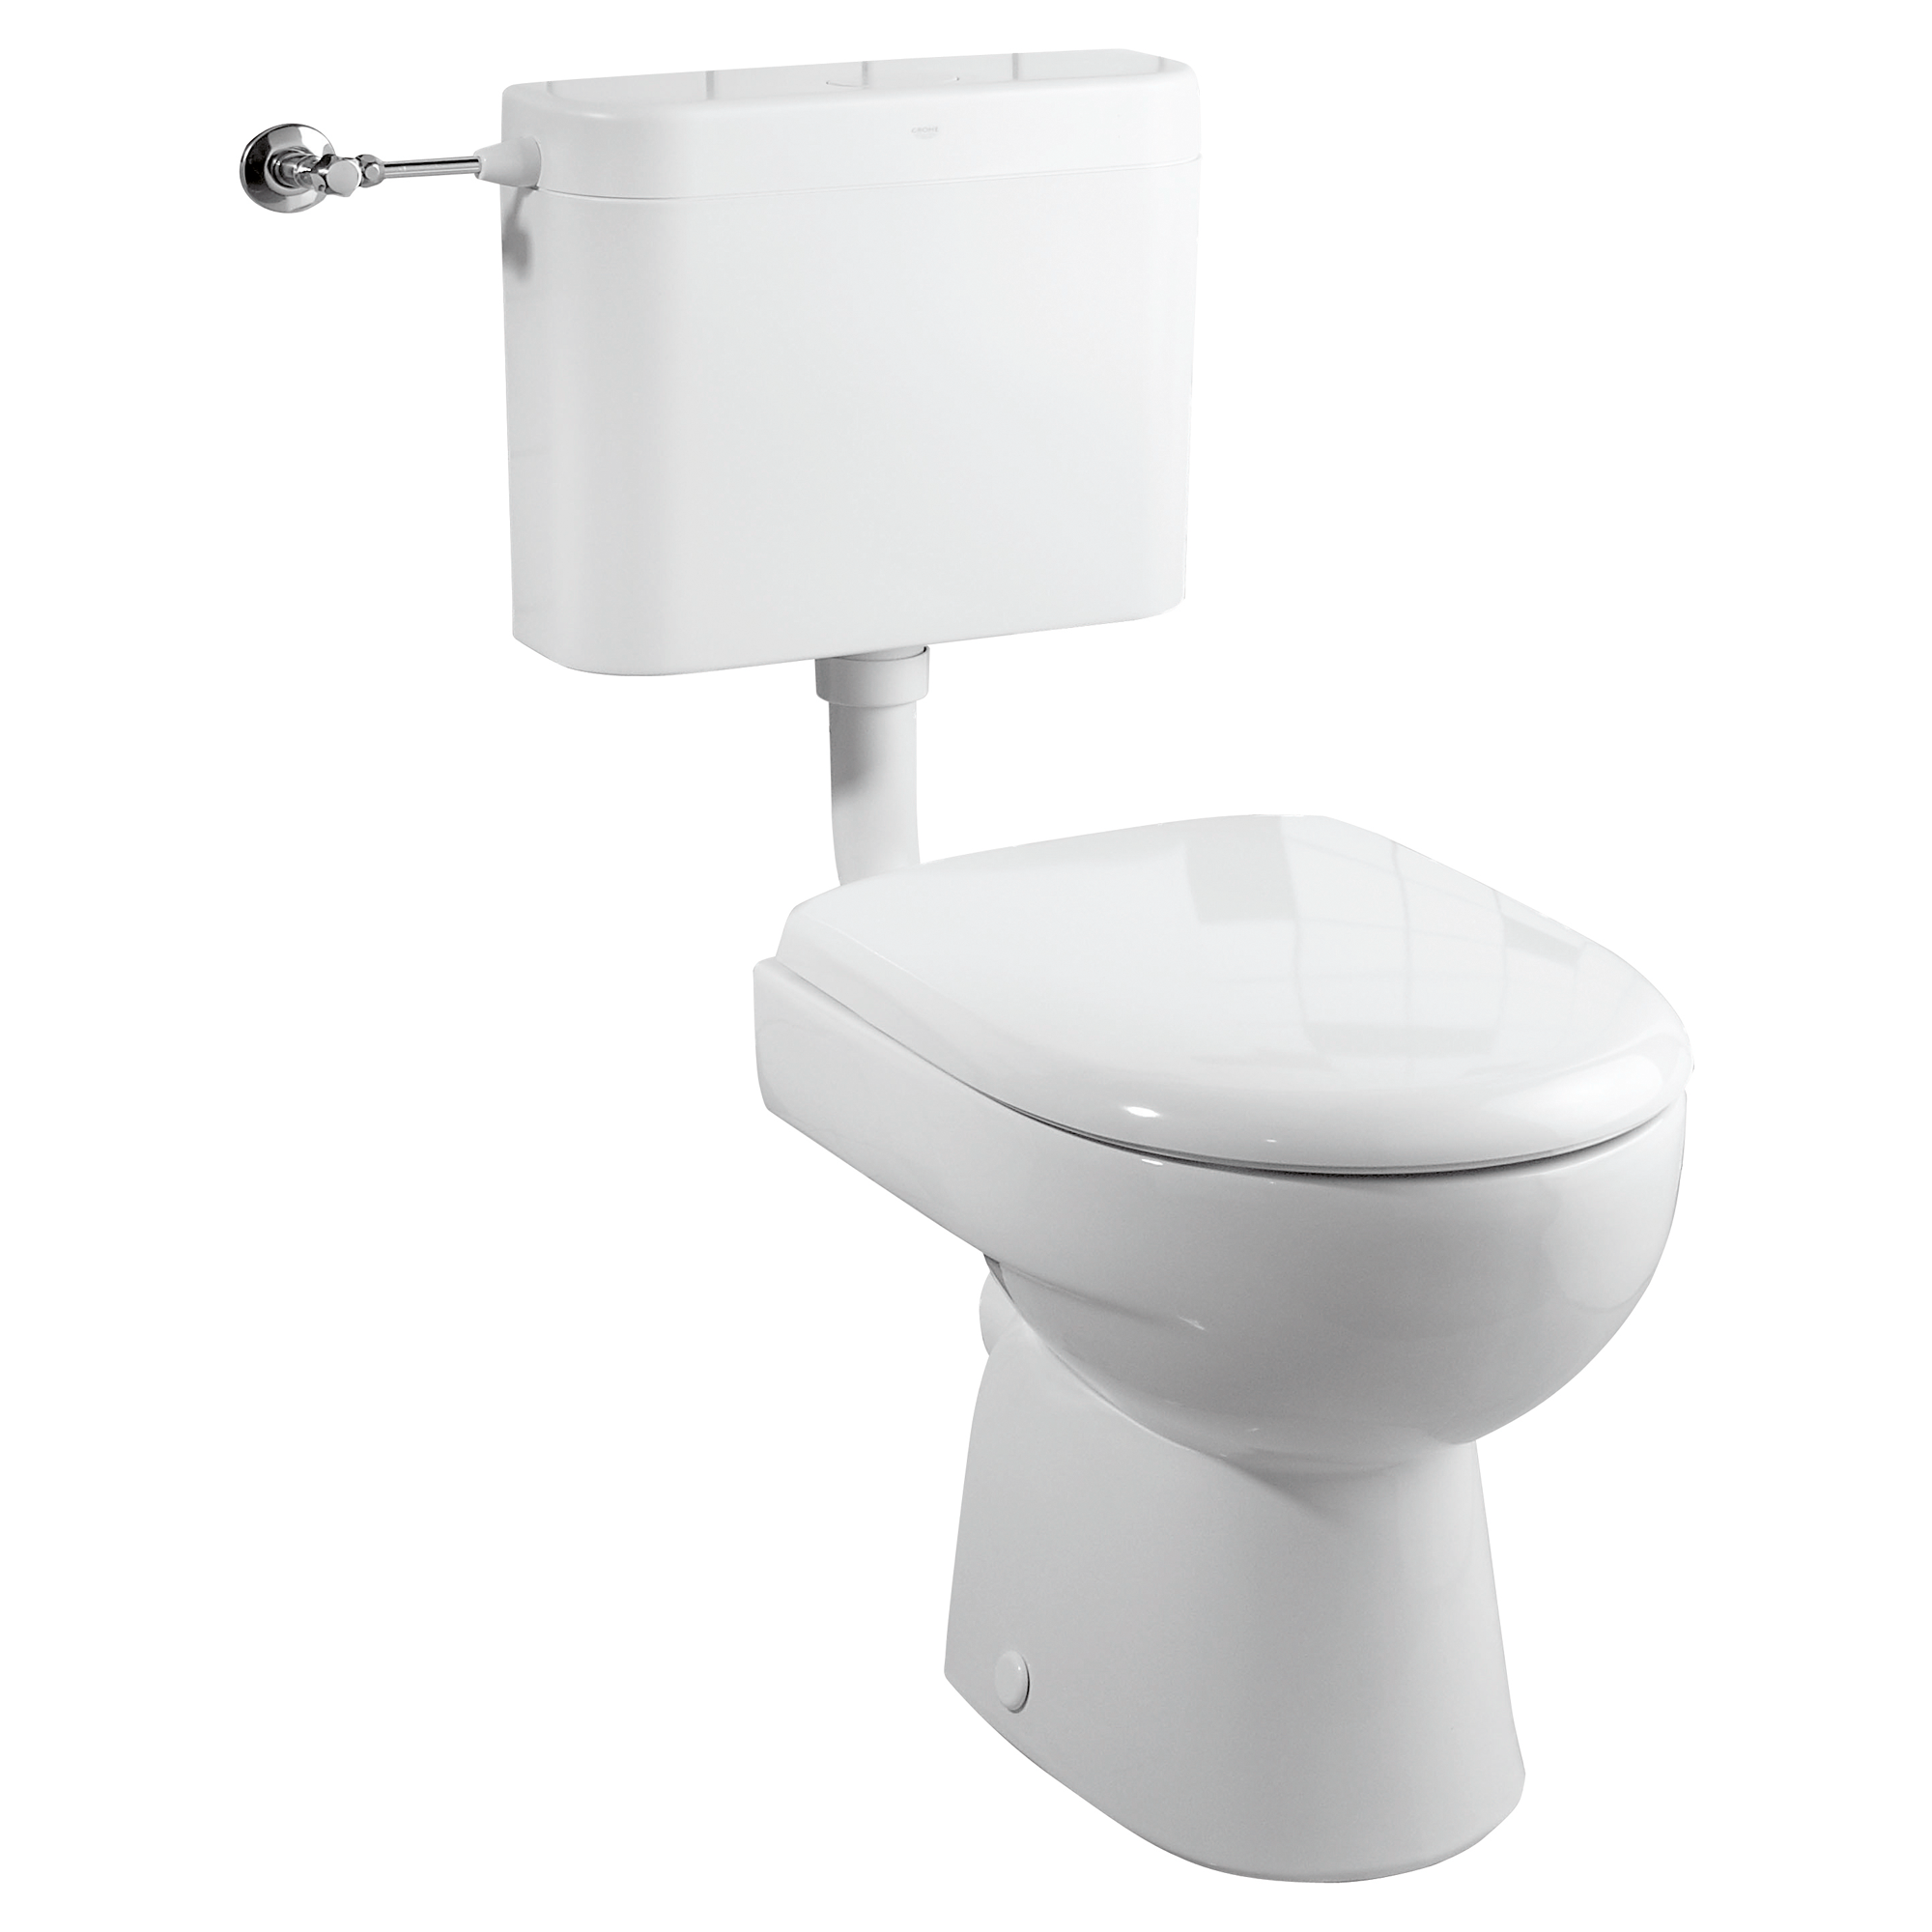 Stand-WC-Set "Renova Nr. 1" + product picture